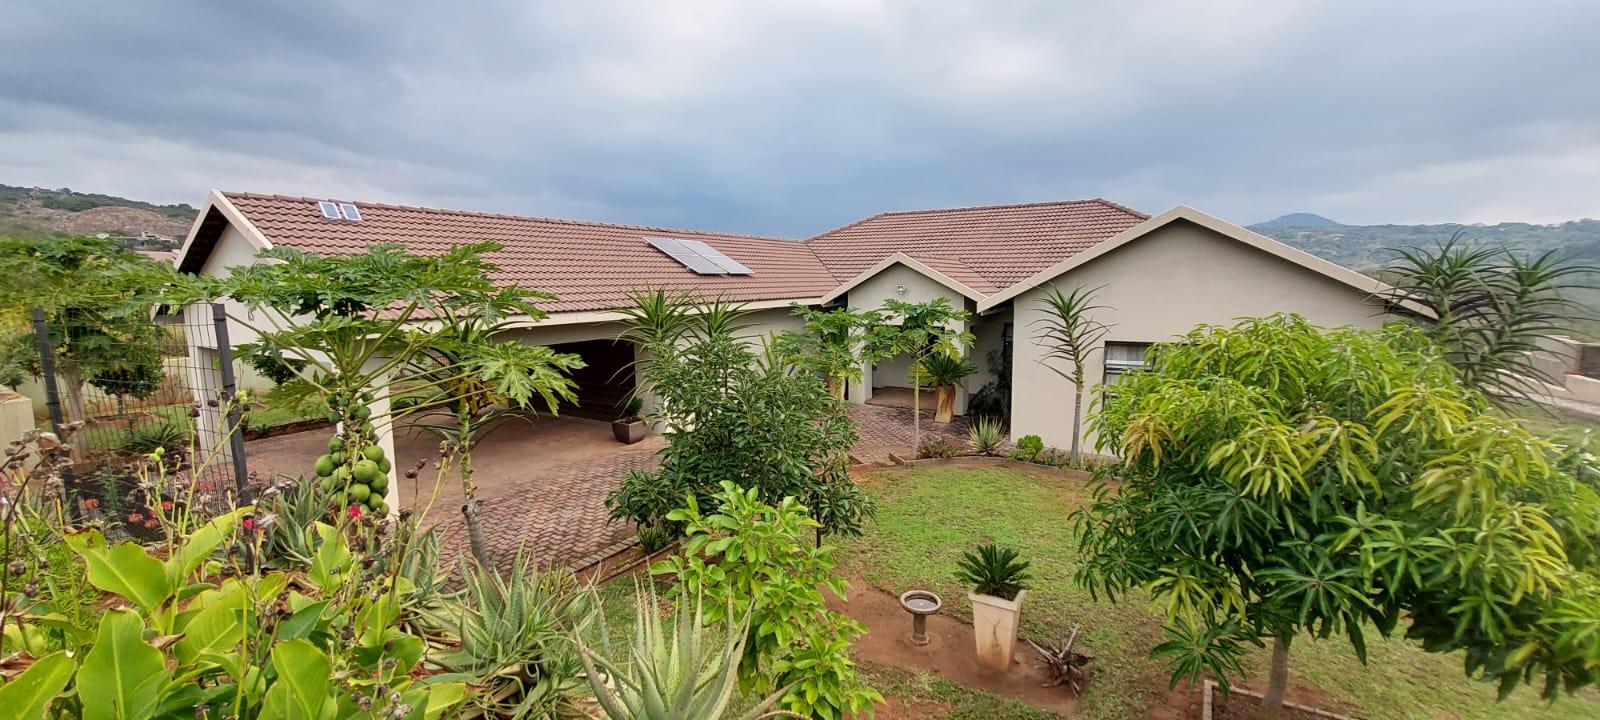 4 Bed House for Sale Ntulo Wildlife Estate Nelspruit